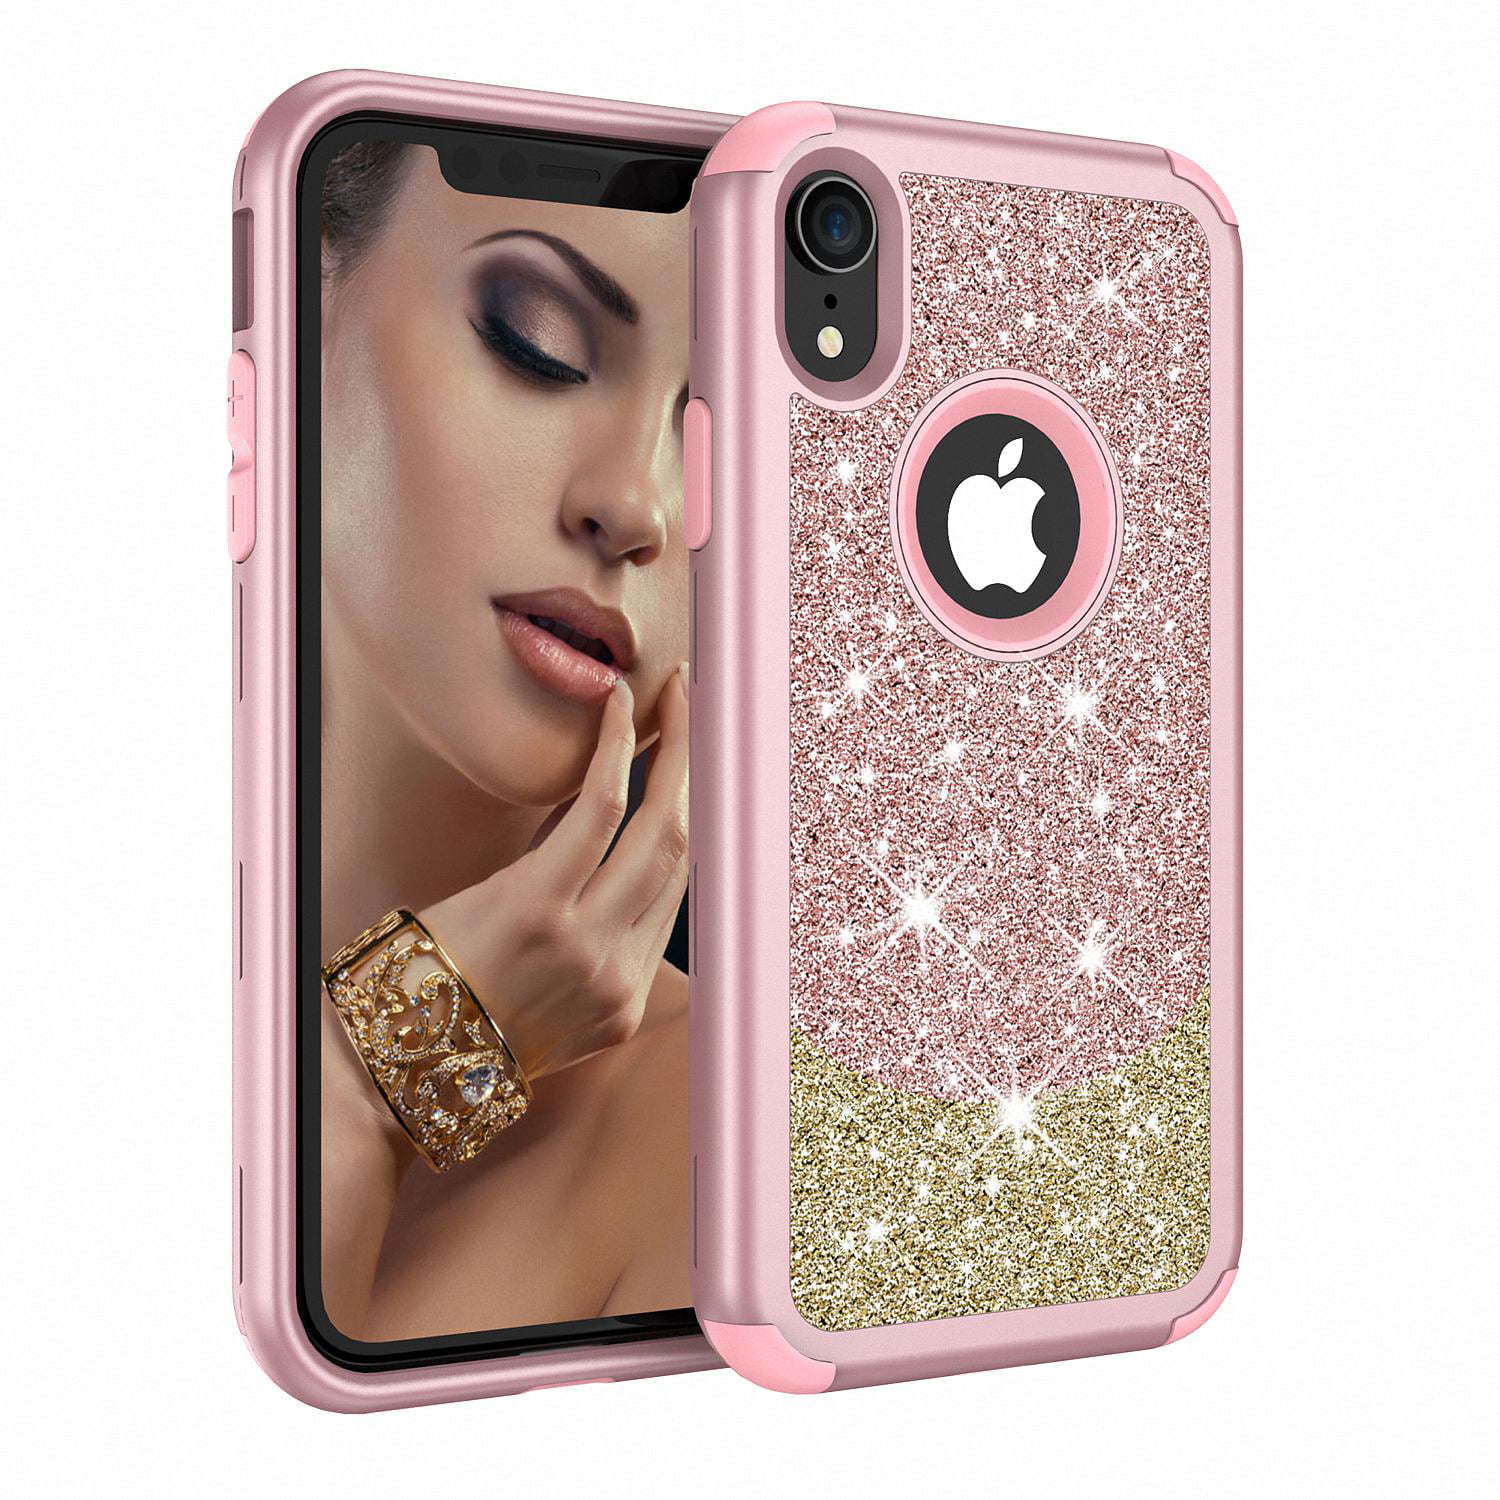 iPhone XR Case Cover 2018 6.1 Inch, Allytech Three Layers Rubber ...